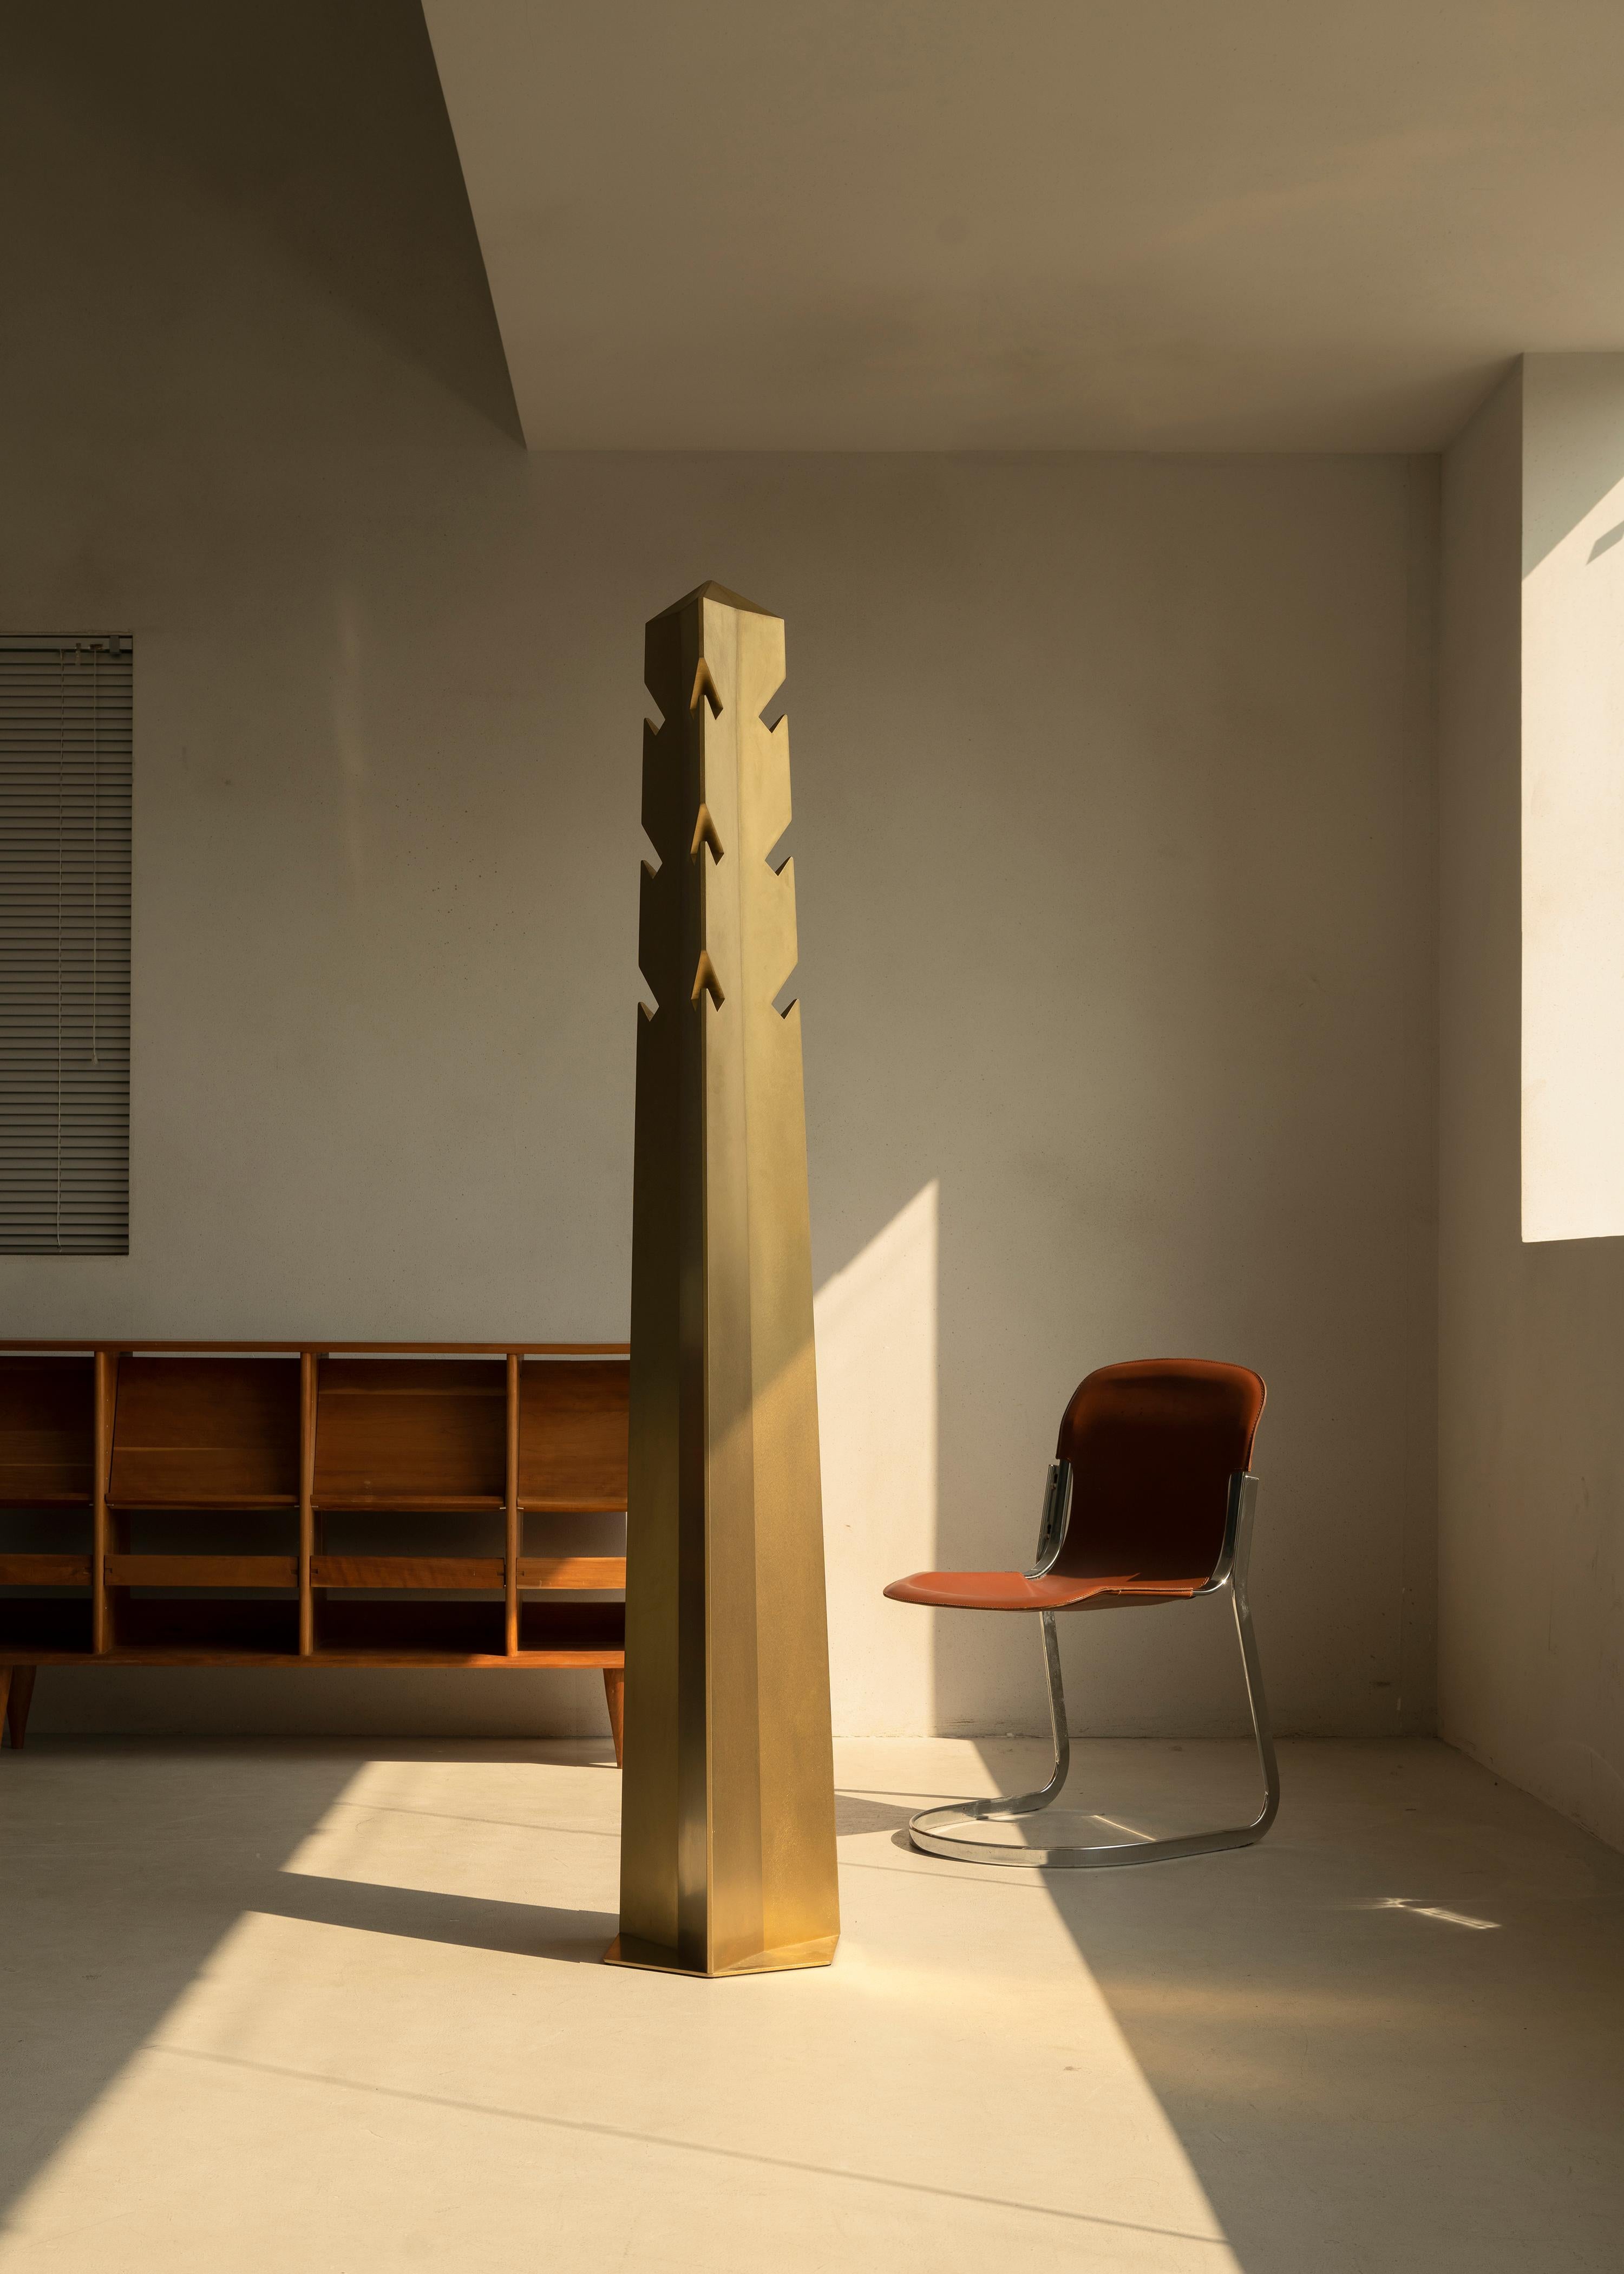 Dimension: L360 x W360 x H 1900mm.
Material: stainless steel.

Obelisk, a clothes stand, as well as an art installation for home, is inspired by the interaction between the obelisk and the sun in ancient Egyptian architecture. The sculptural